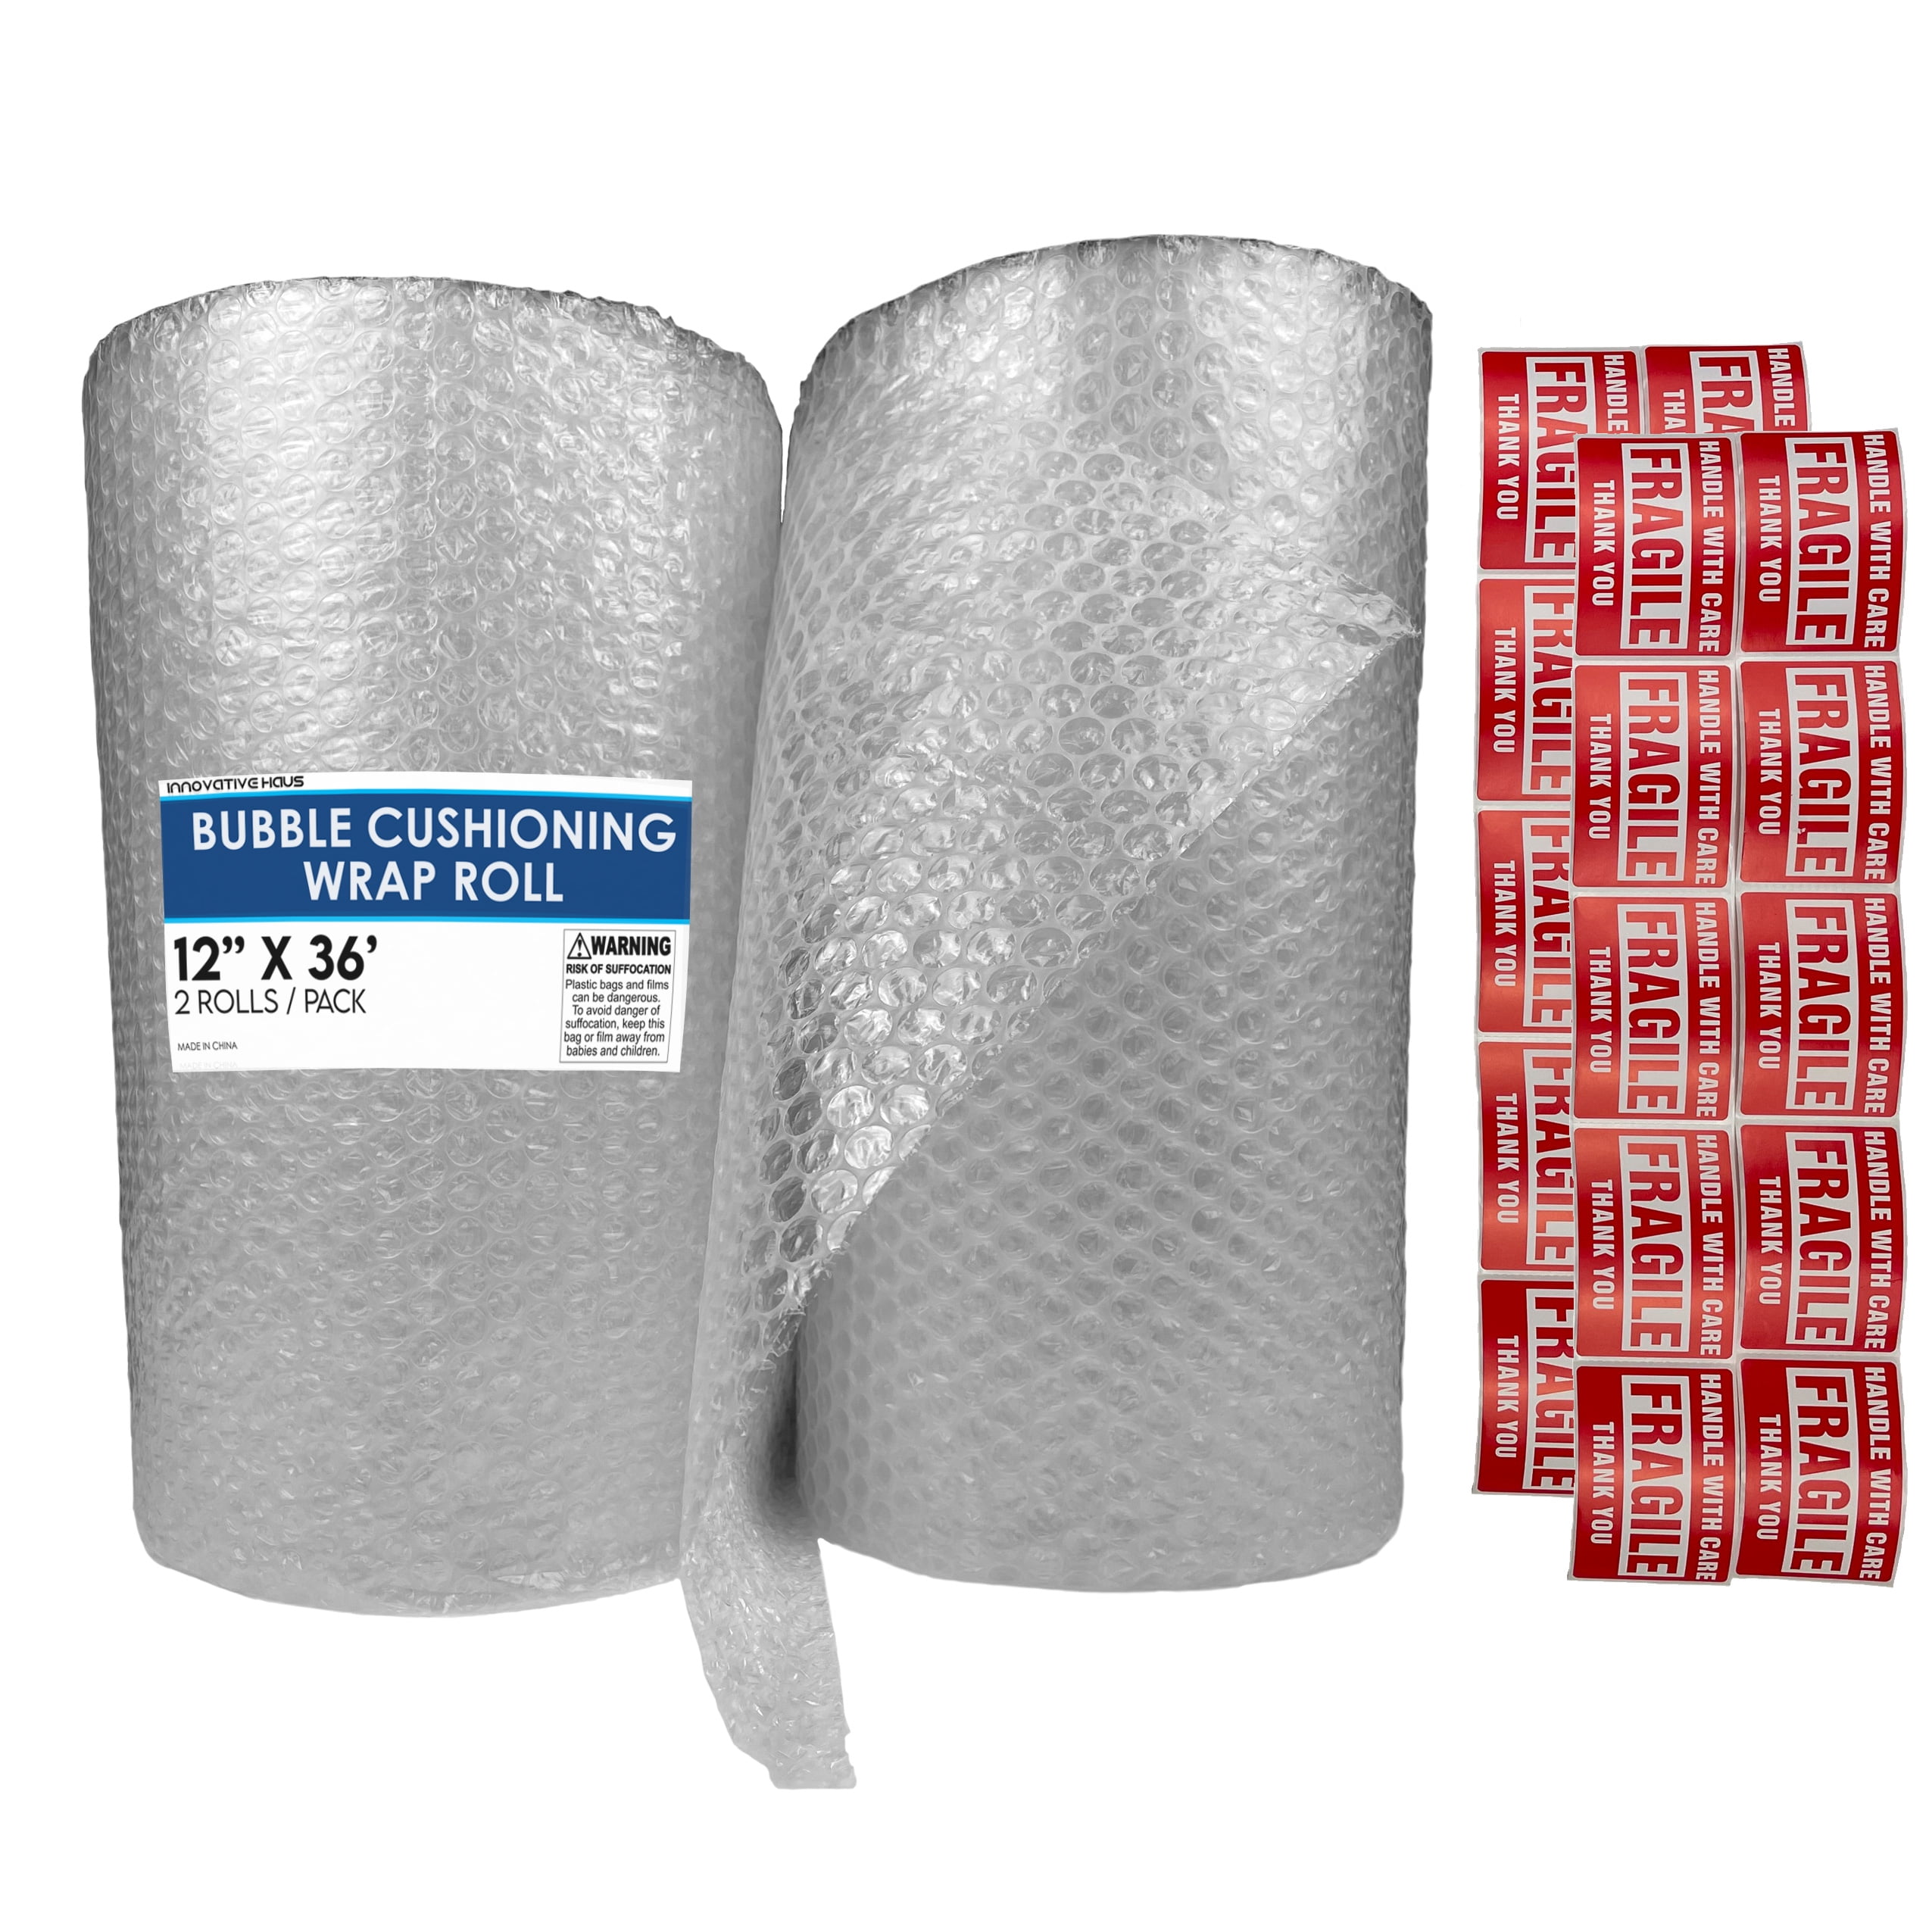 Bubble Cushioning Wrap Roll 12x36 Small Bubble Perforated Every 12 EASY TO TEAR for Packing Moving Packaging 2 Rolls, Total 12x72 Moving Supplies with 20 Fragile Stickers Shipping Wrapping 